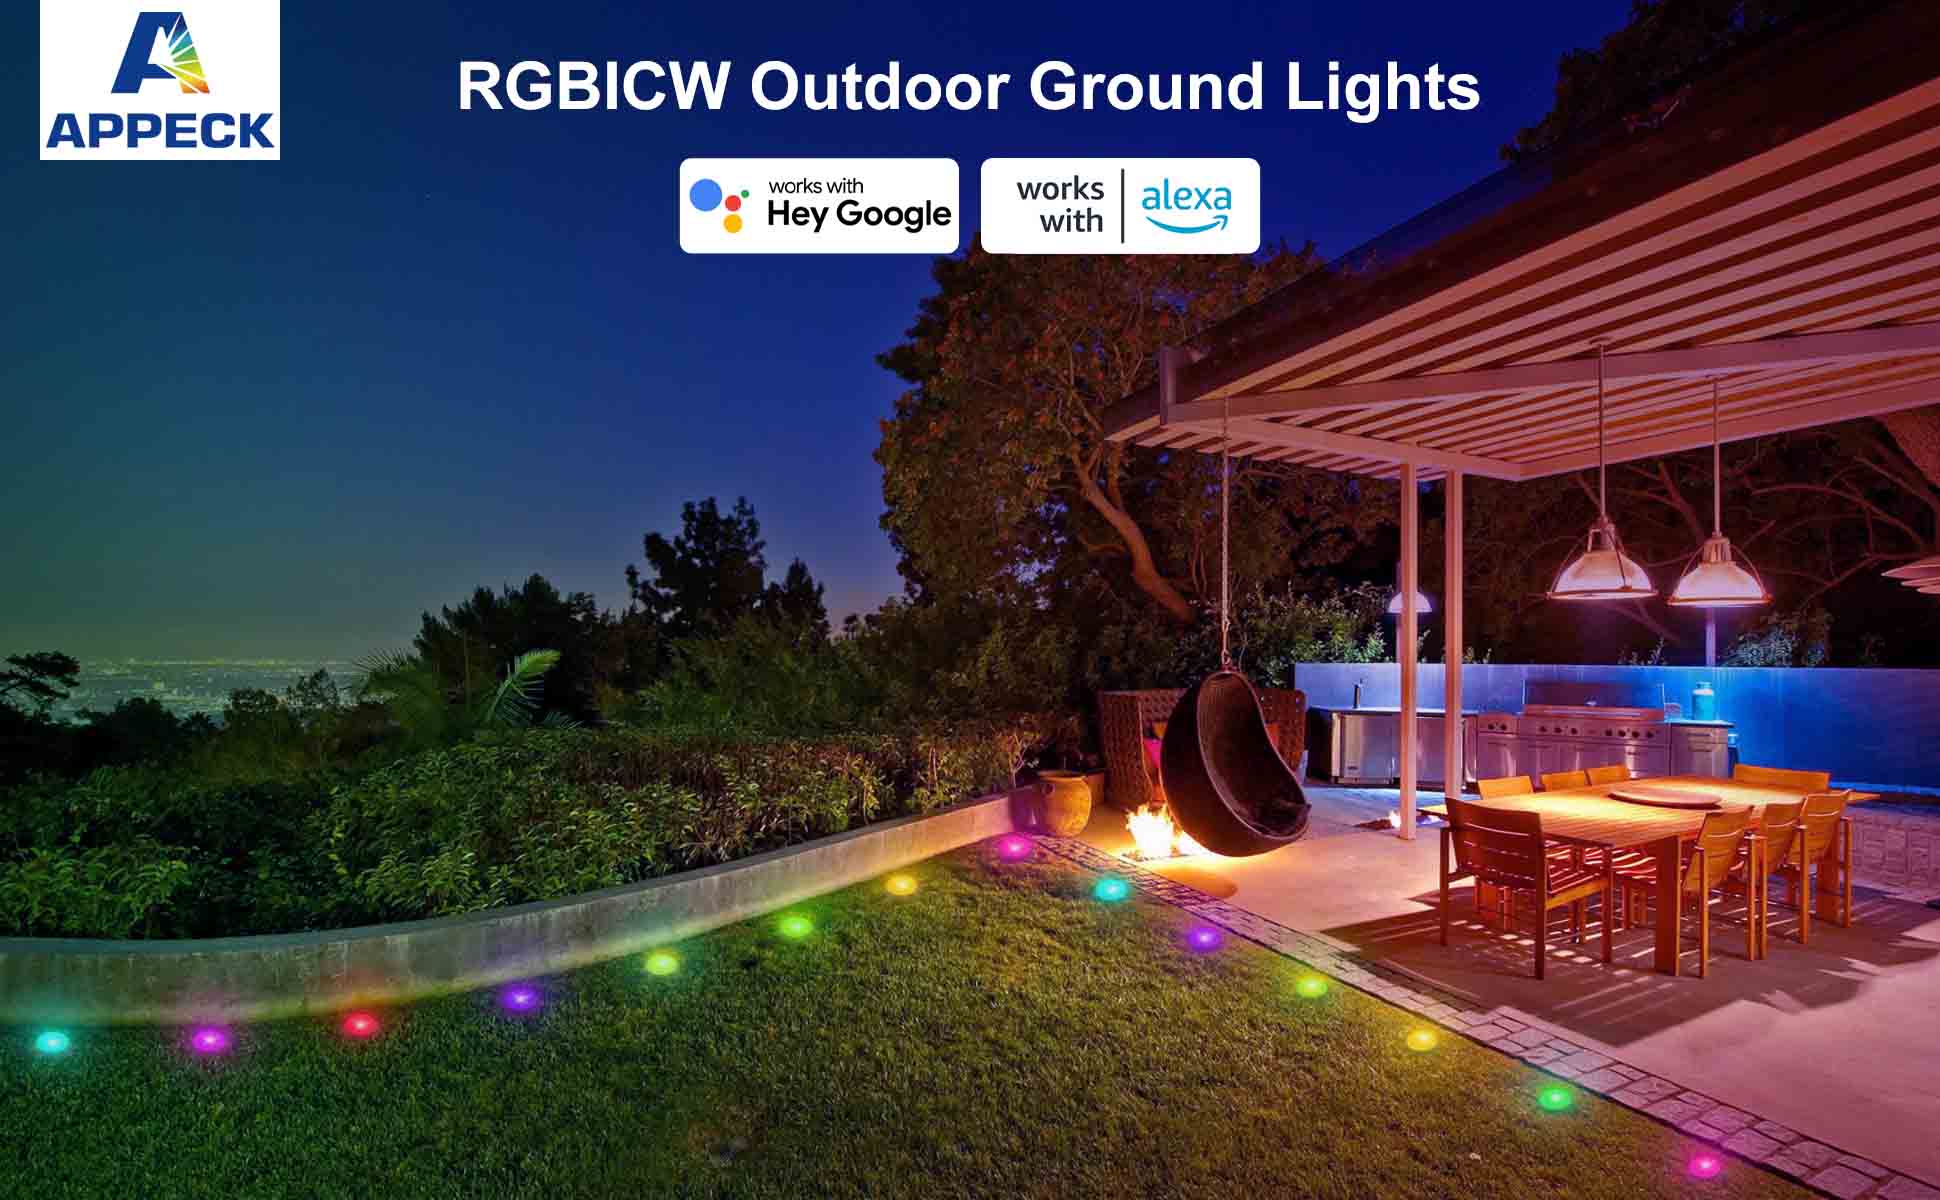 APPECK Outdoor Ground Lights-RGBICW